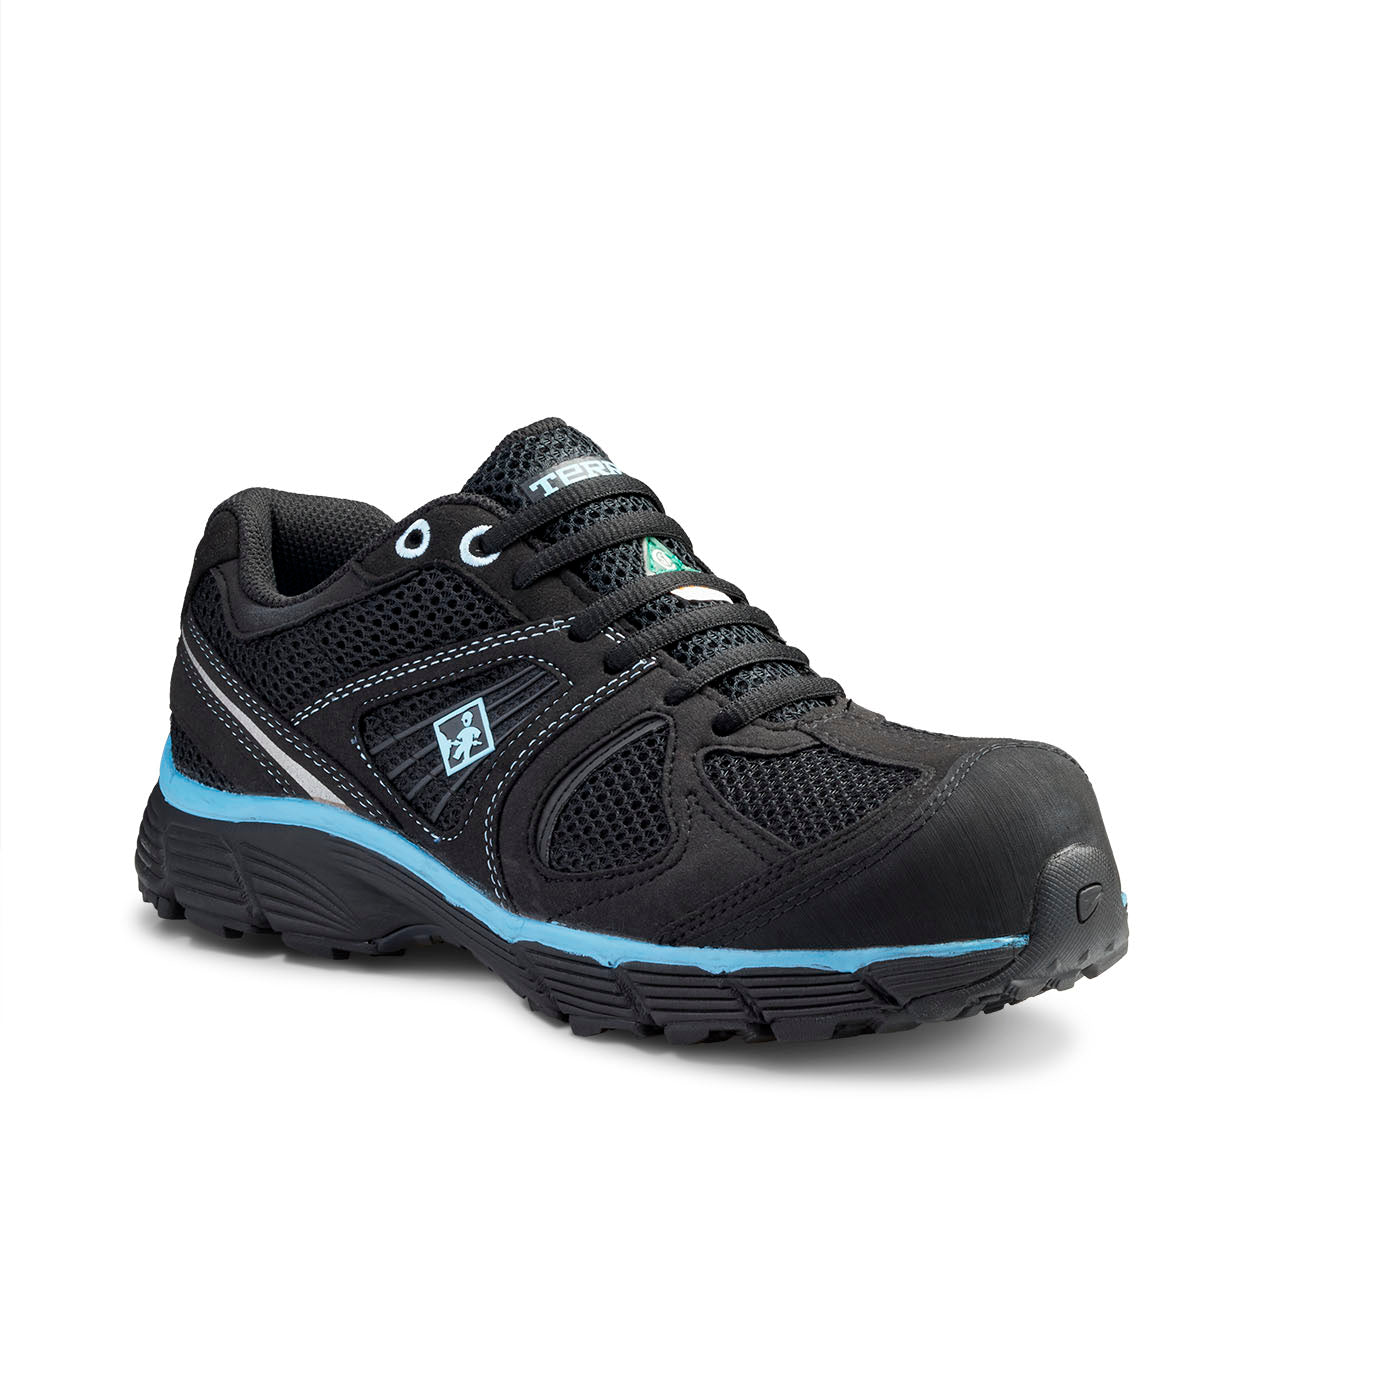 Terra Pacer 2.0 Breathable Composite Toe Women's Safety Shoes | Black/Light Blue | Sizes 5 - 10 Work Boots - Cleanflow